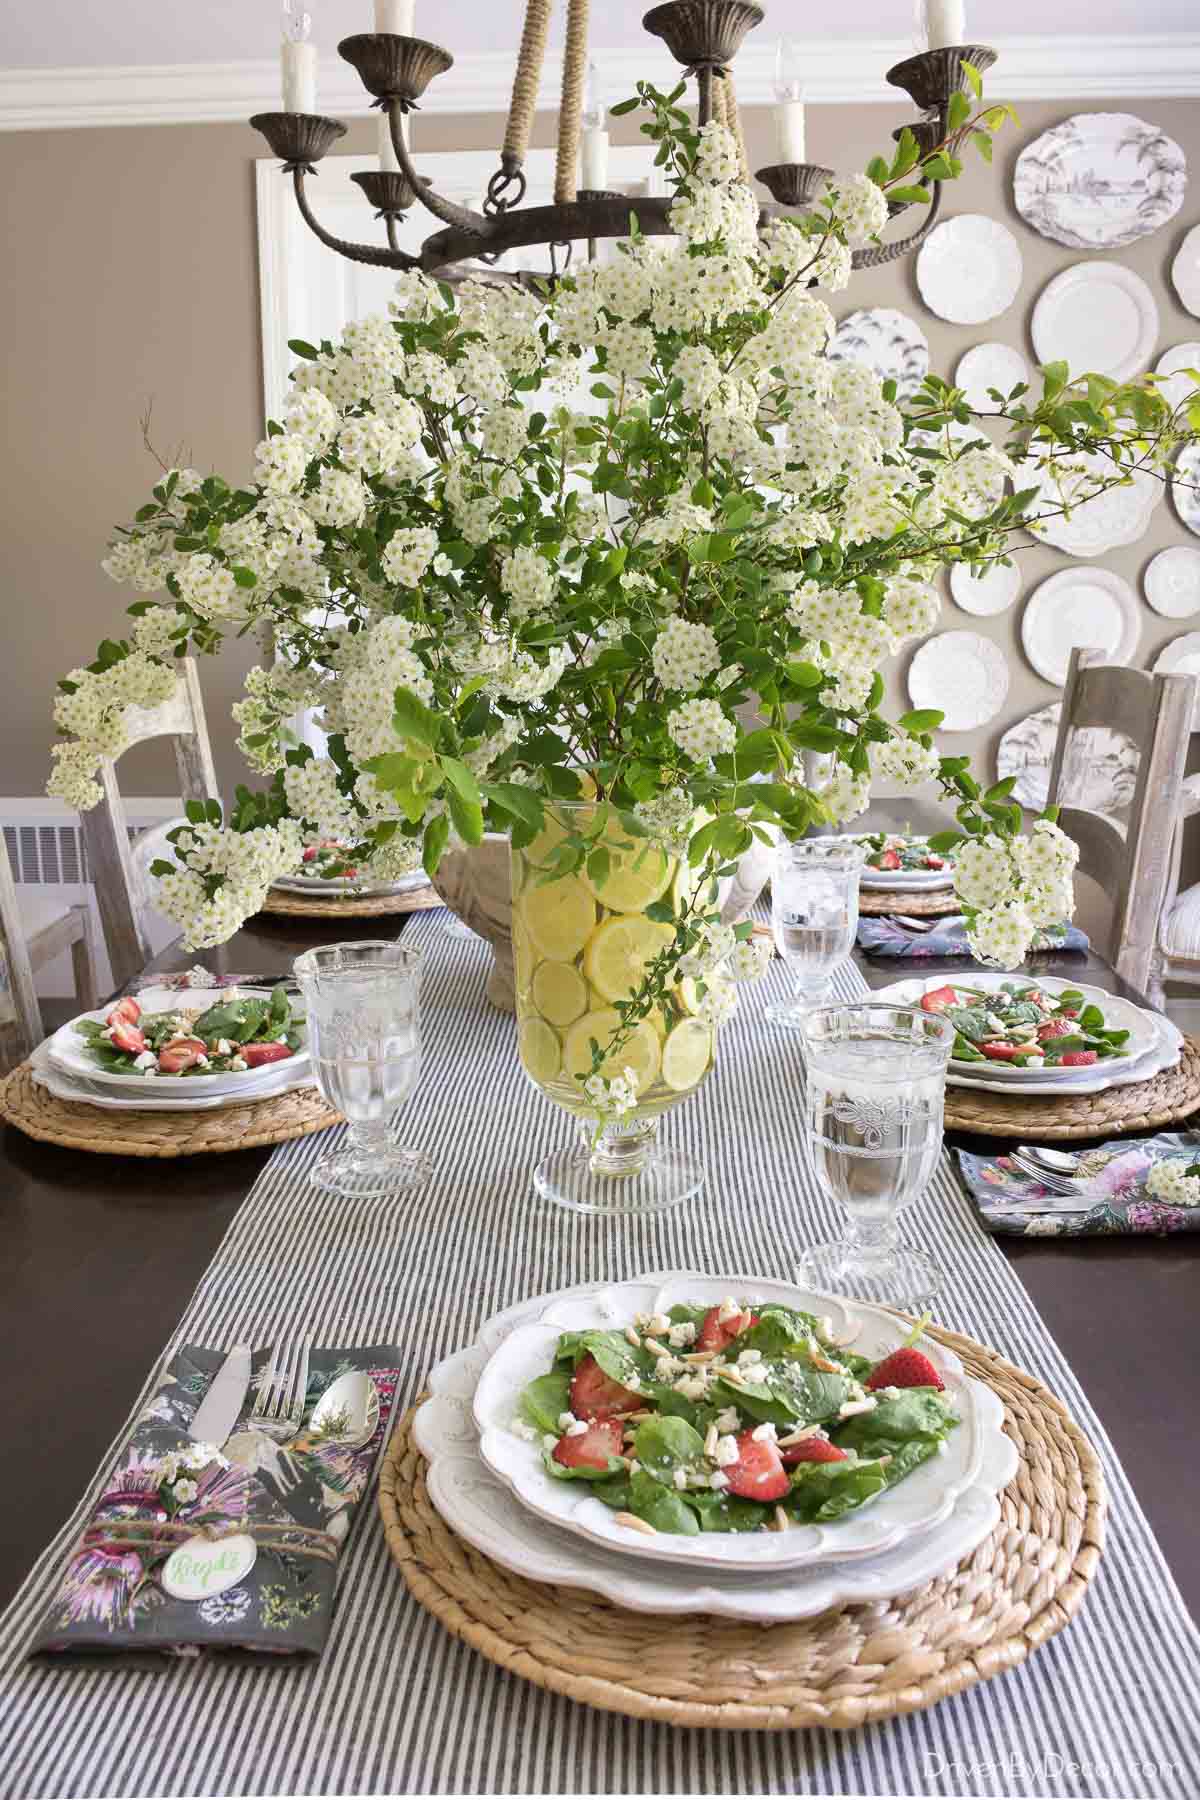 A lemon-lined vase is perfect for this spring flower arrangement!